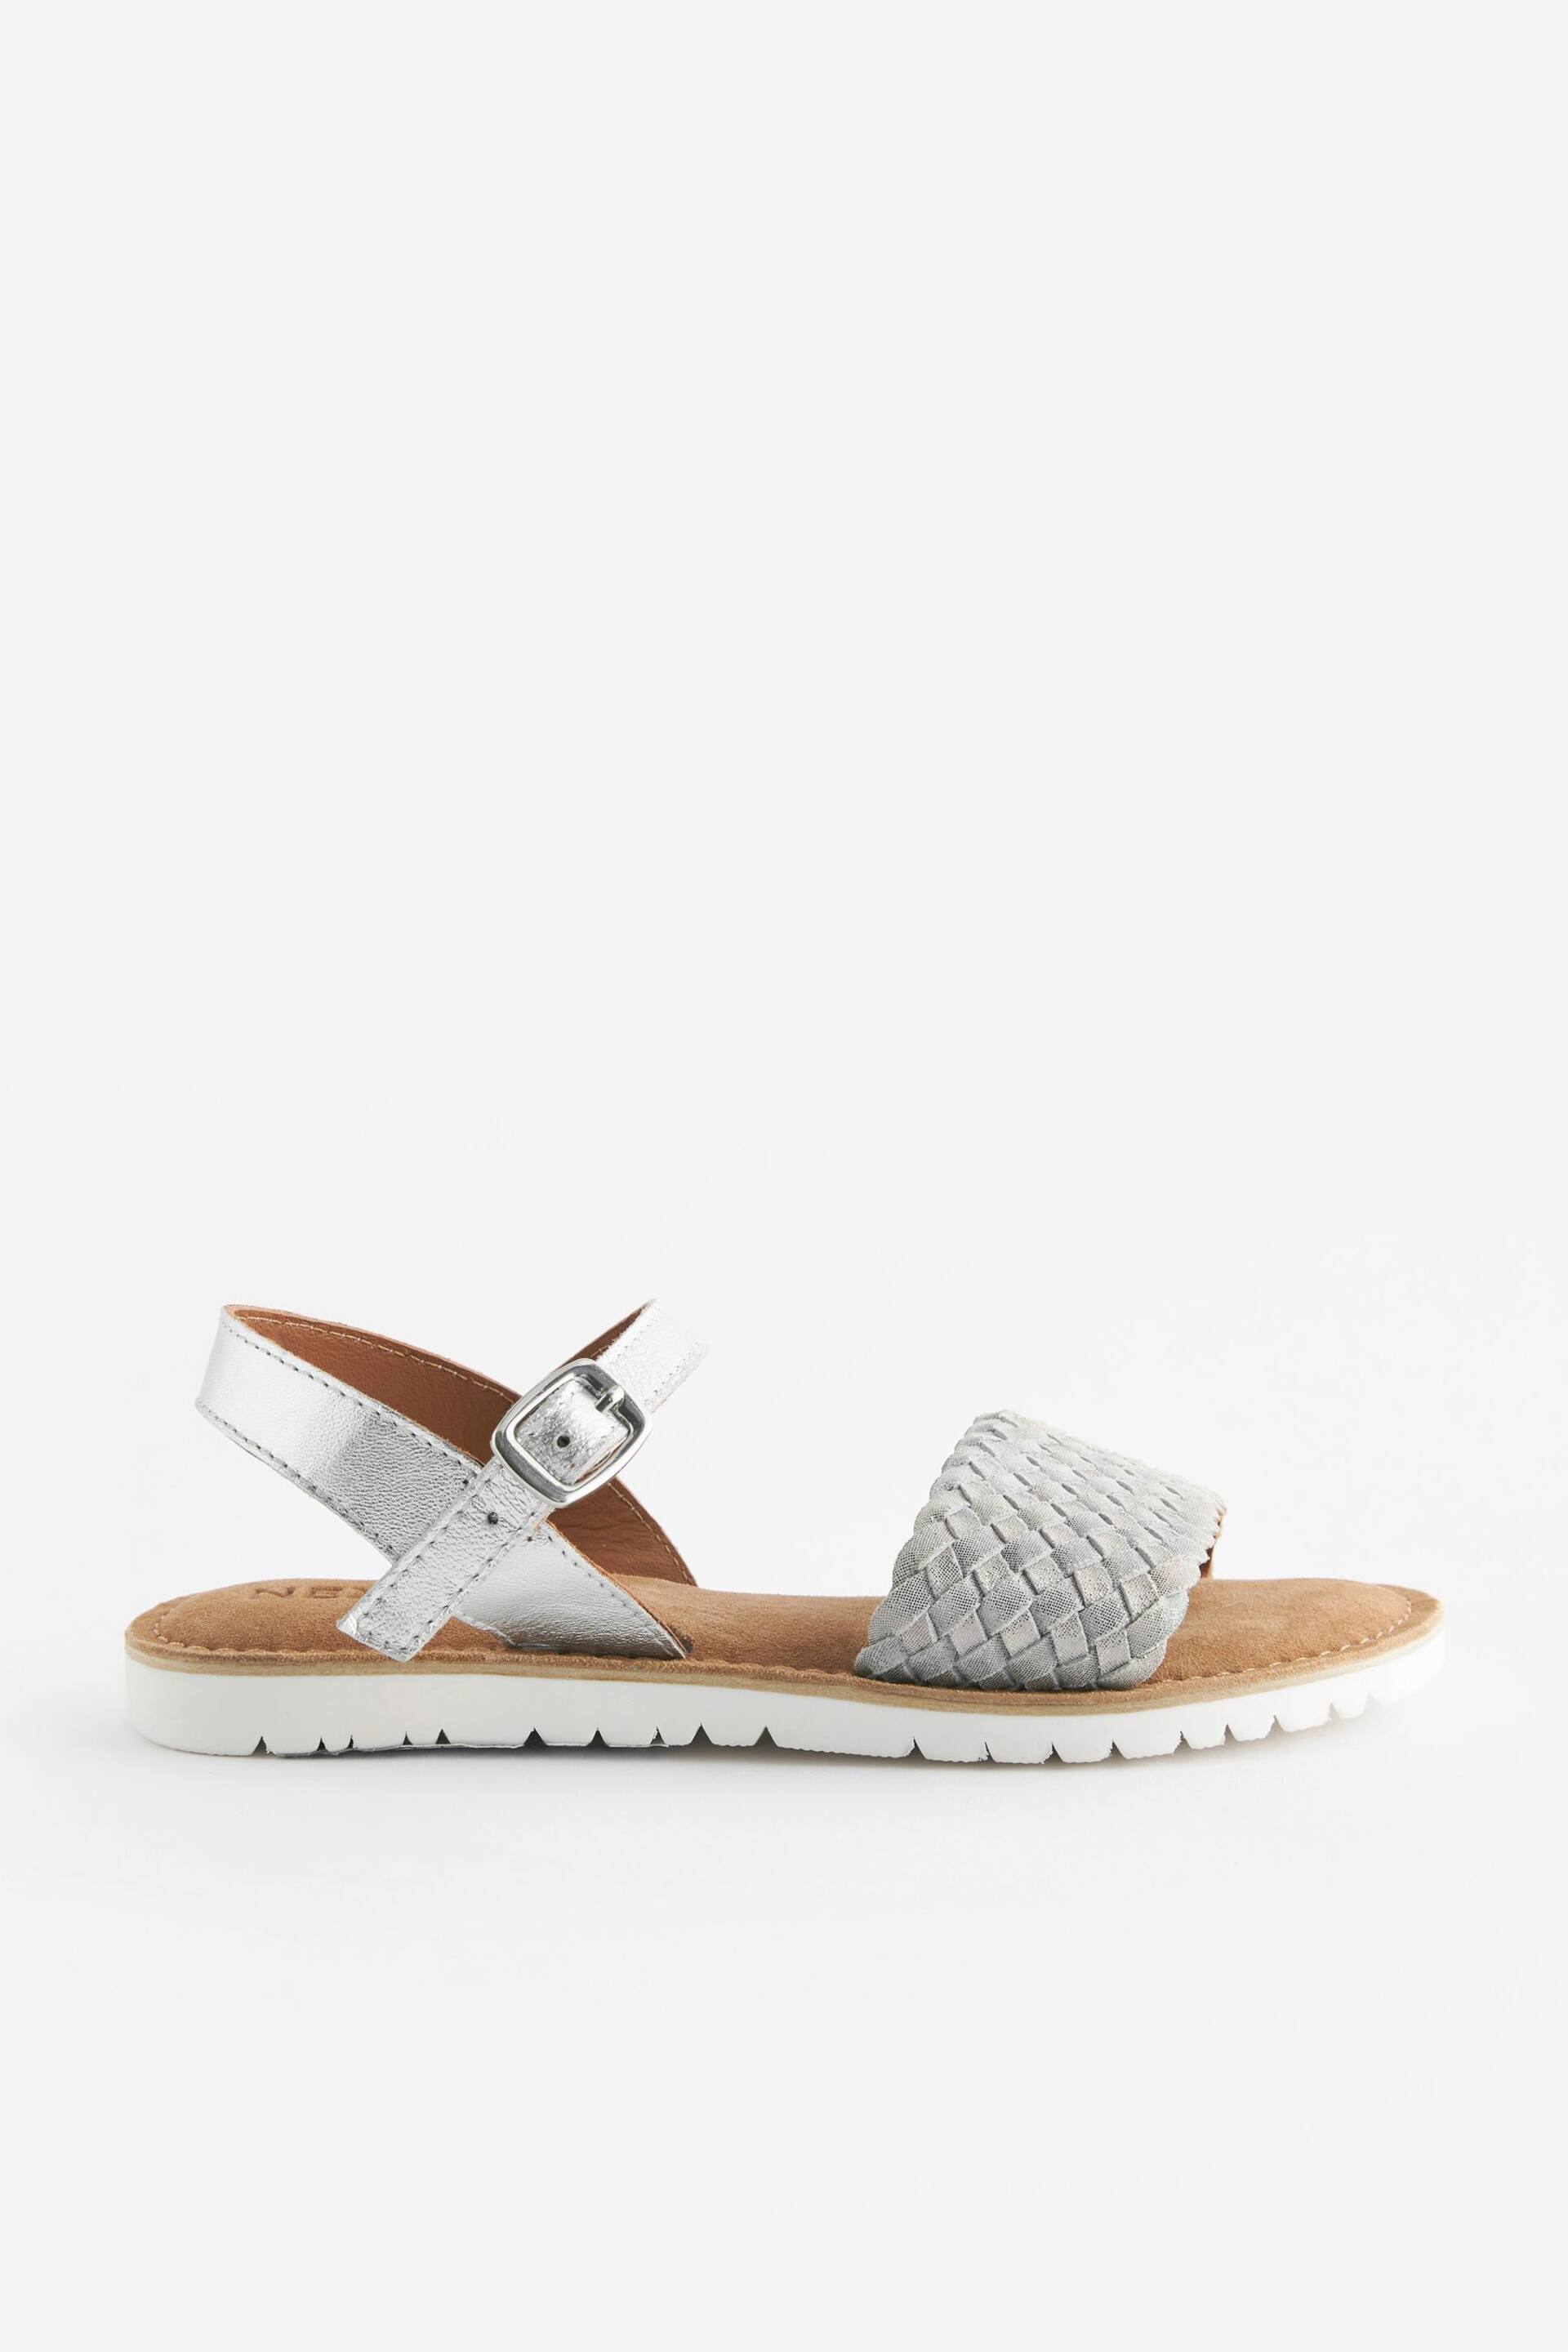 Silver Leather Woven Sandals - Image 3 of 6